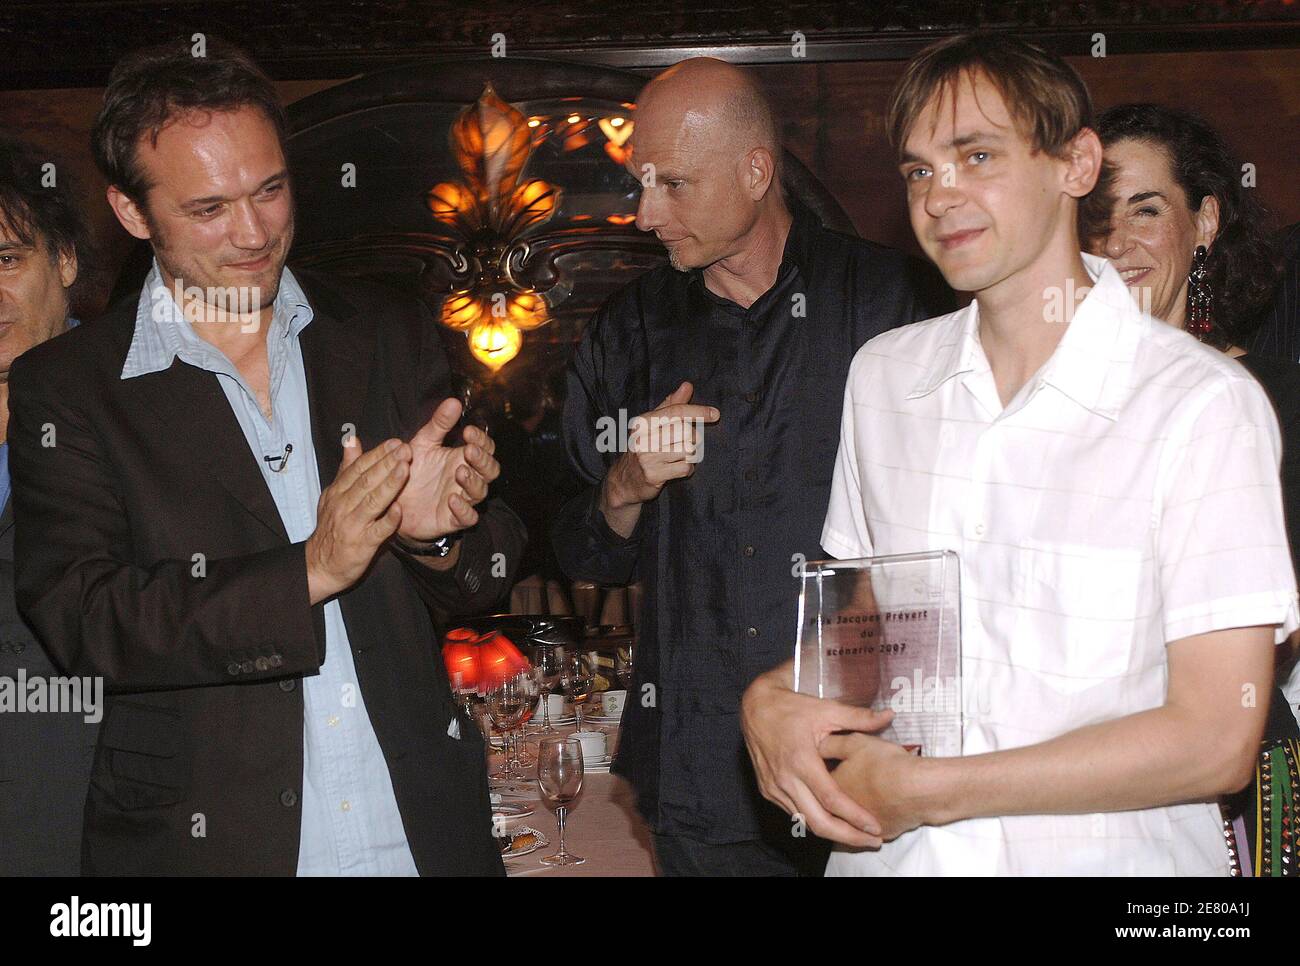 President of jury Vincent Perez awards Christophe Turpin scenarist of 'Jean-Philippe' during Jacques Prevert prize ceremony held at Maxim's restaurant in Paris, France on April 25, 2007. Photo by Giancarlo Gorassini/ABACAPRESS.COM Stock Photo